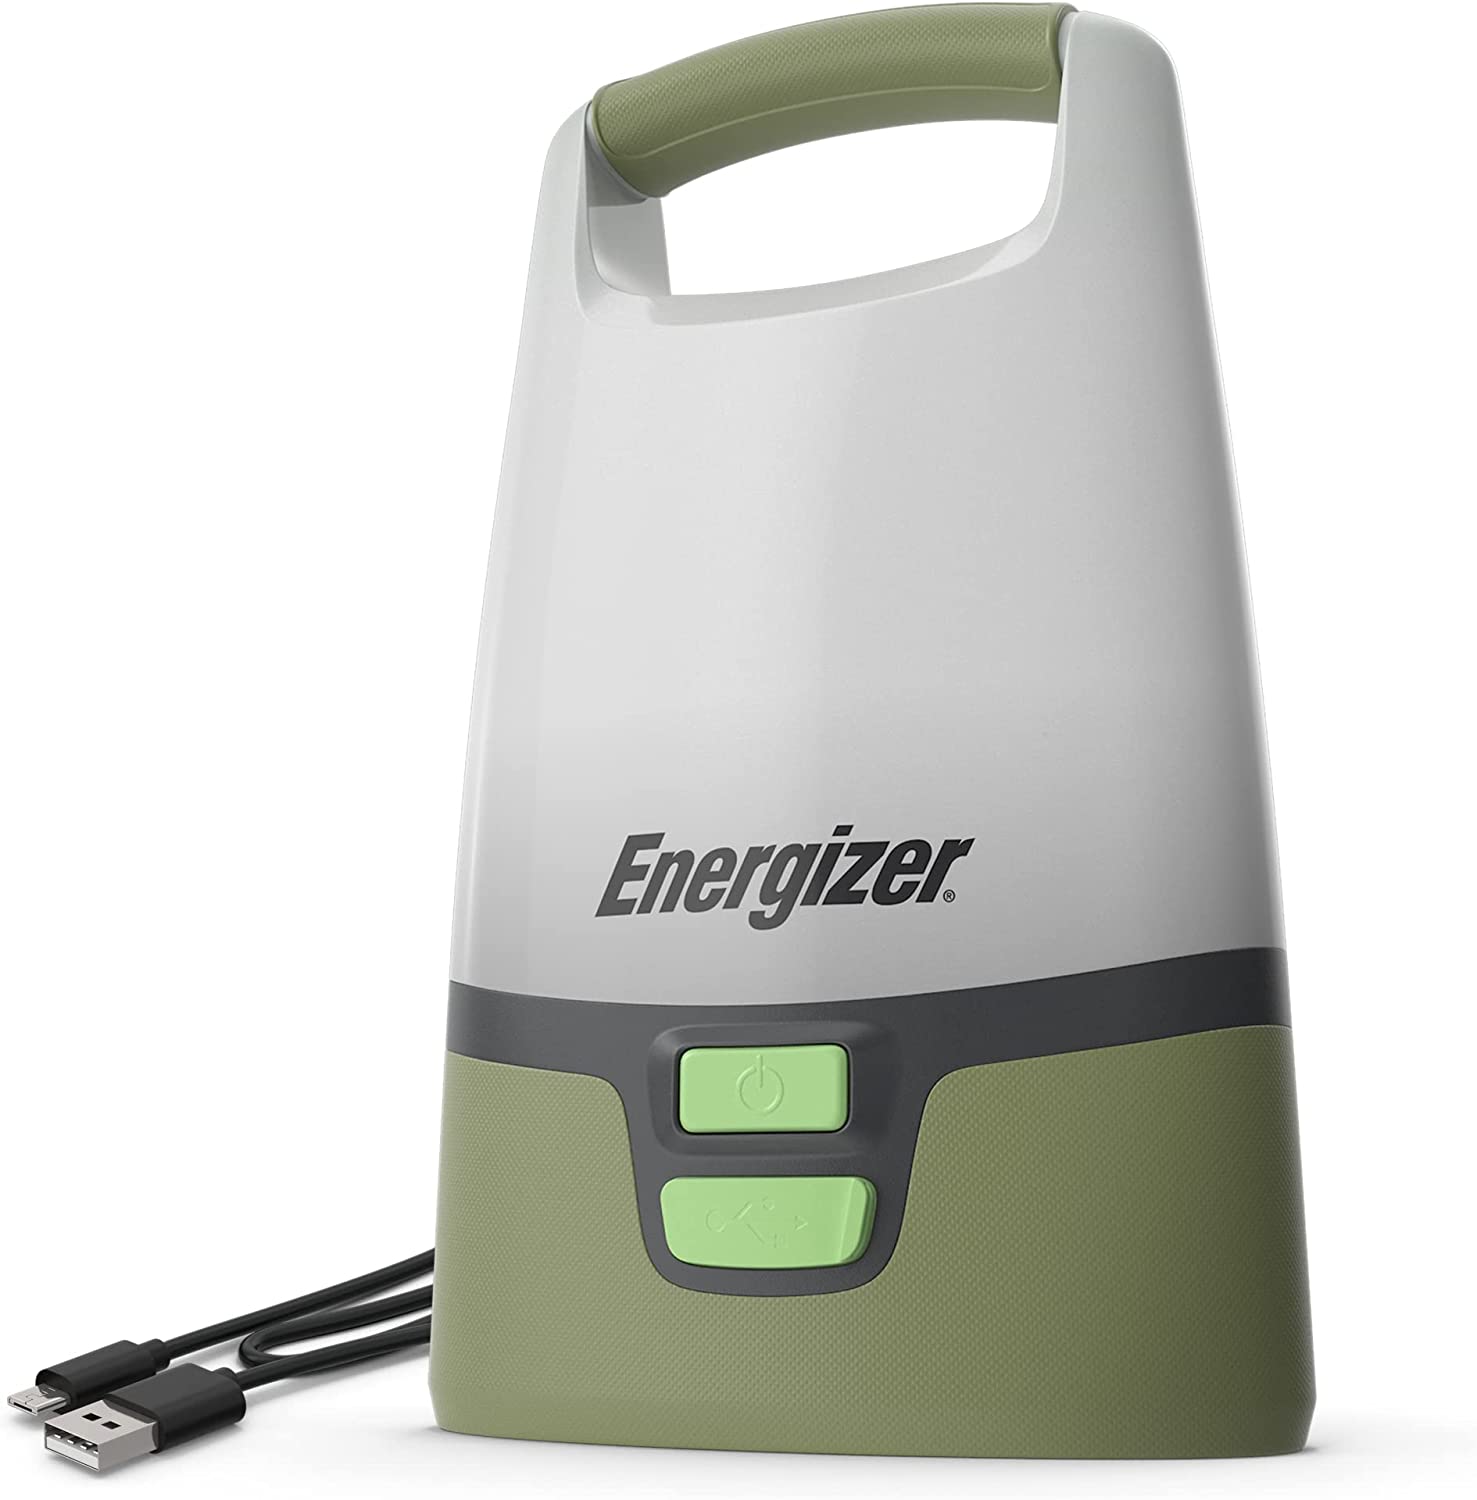 Energizer Vision LED Camping Lantern, Bright Rechargeable Lantern, Water Resistant Emergency Light with Charging Cable, Pack of 1, Forest Green $21.12